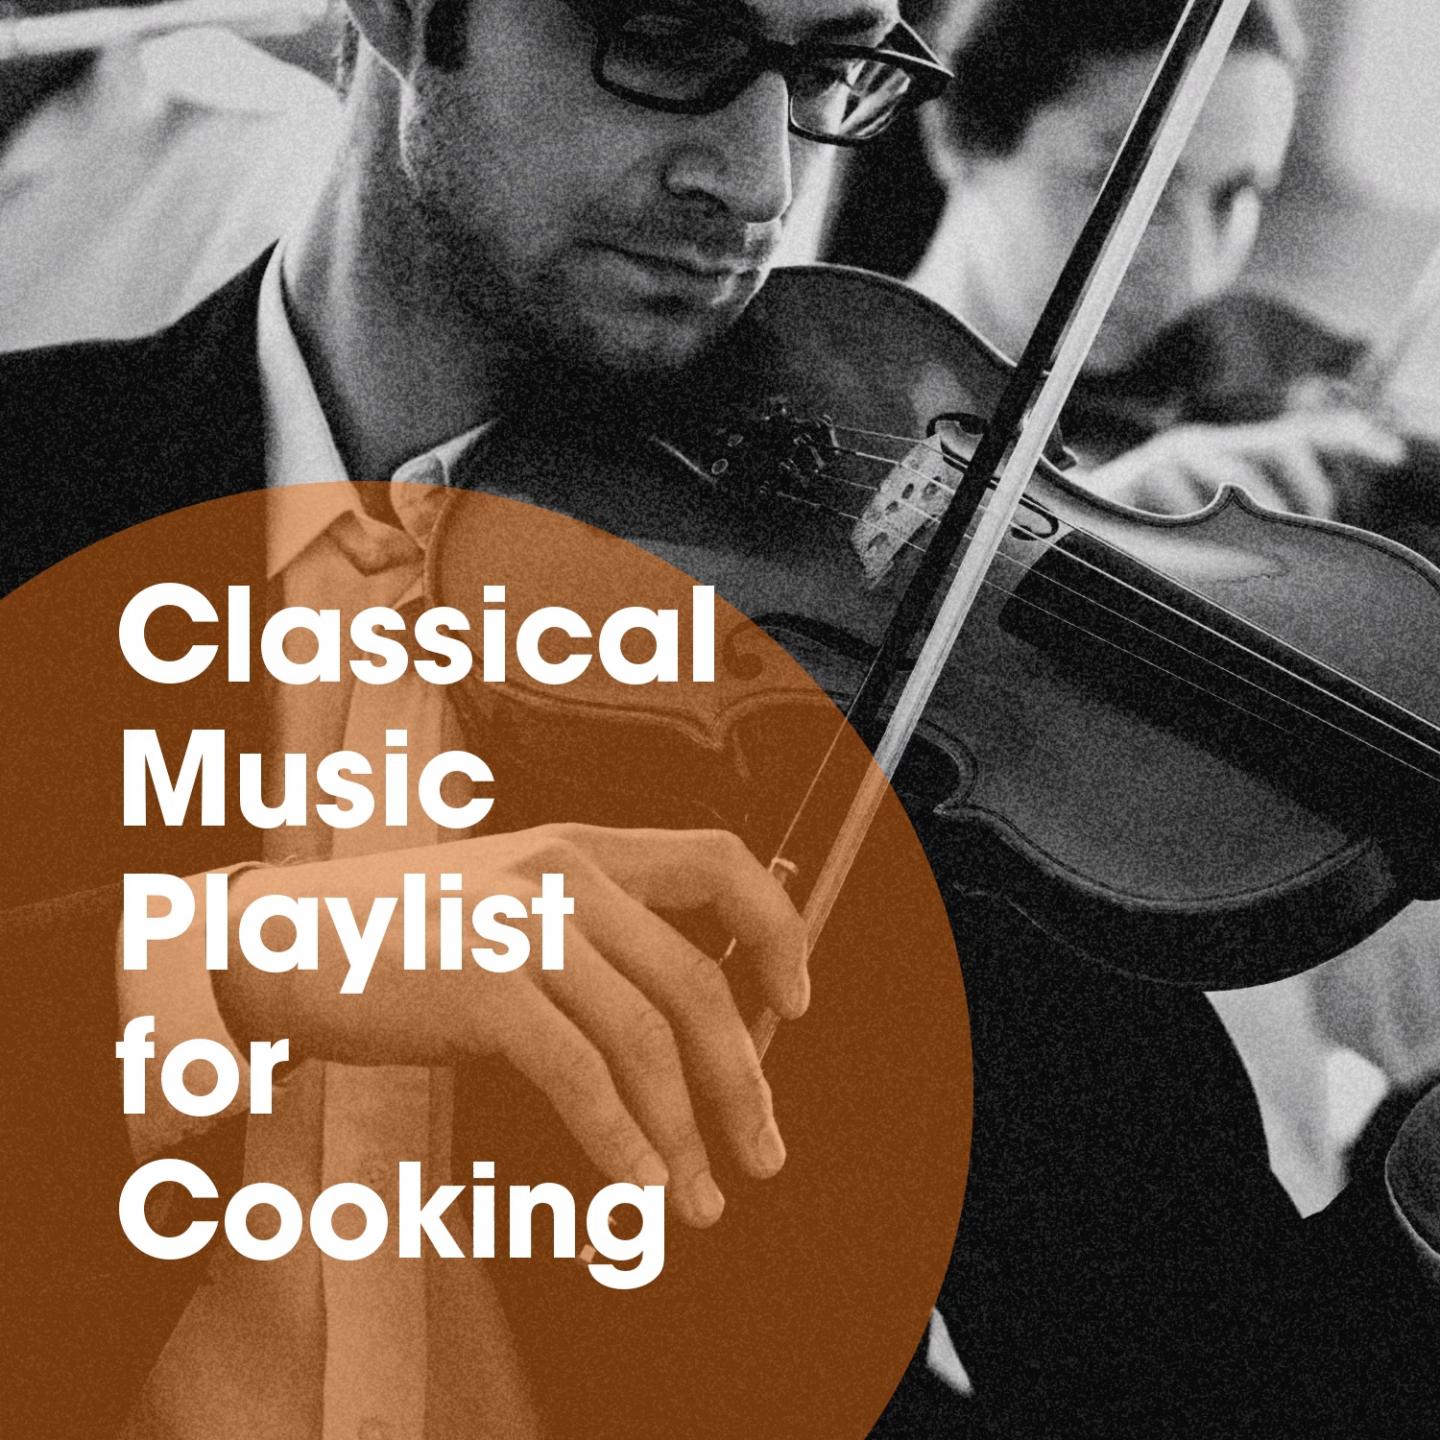 Classical Music Playlist for Cooking